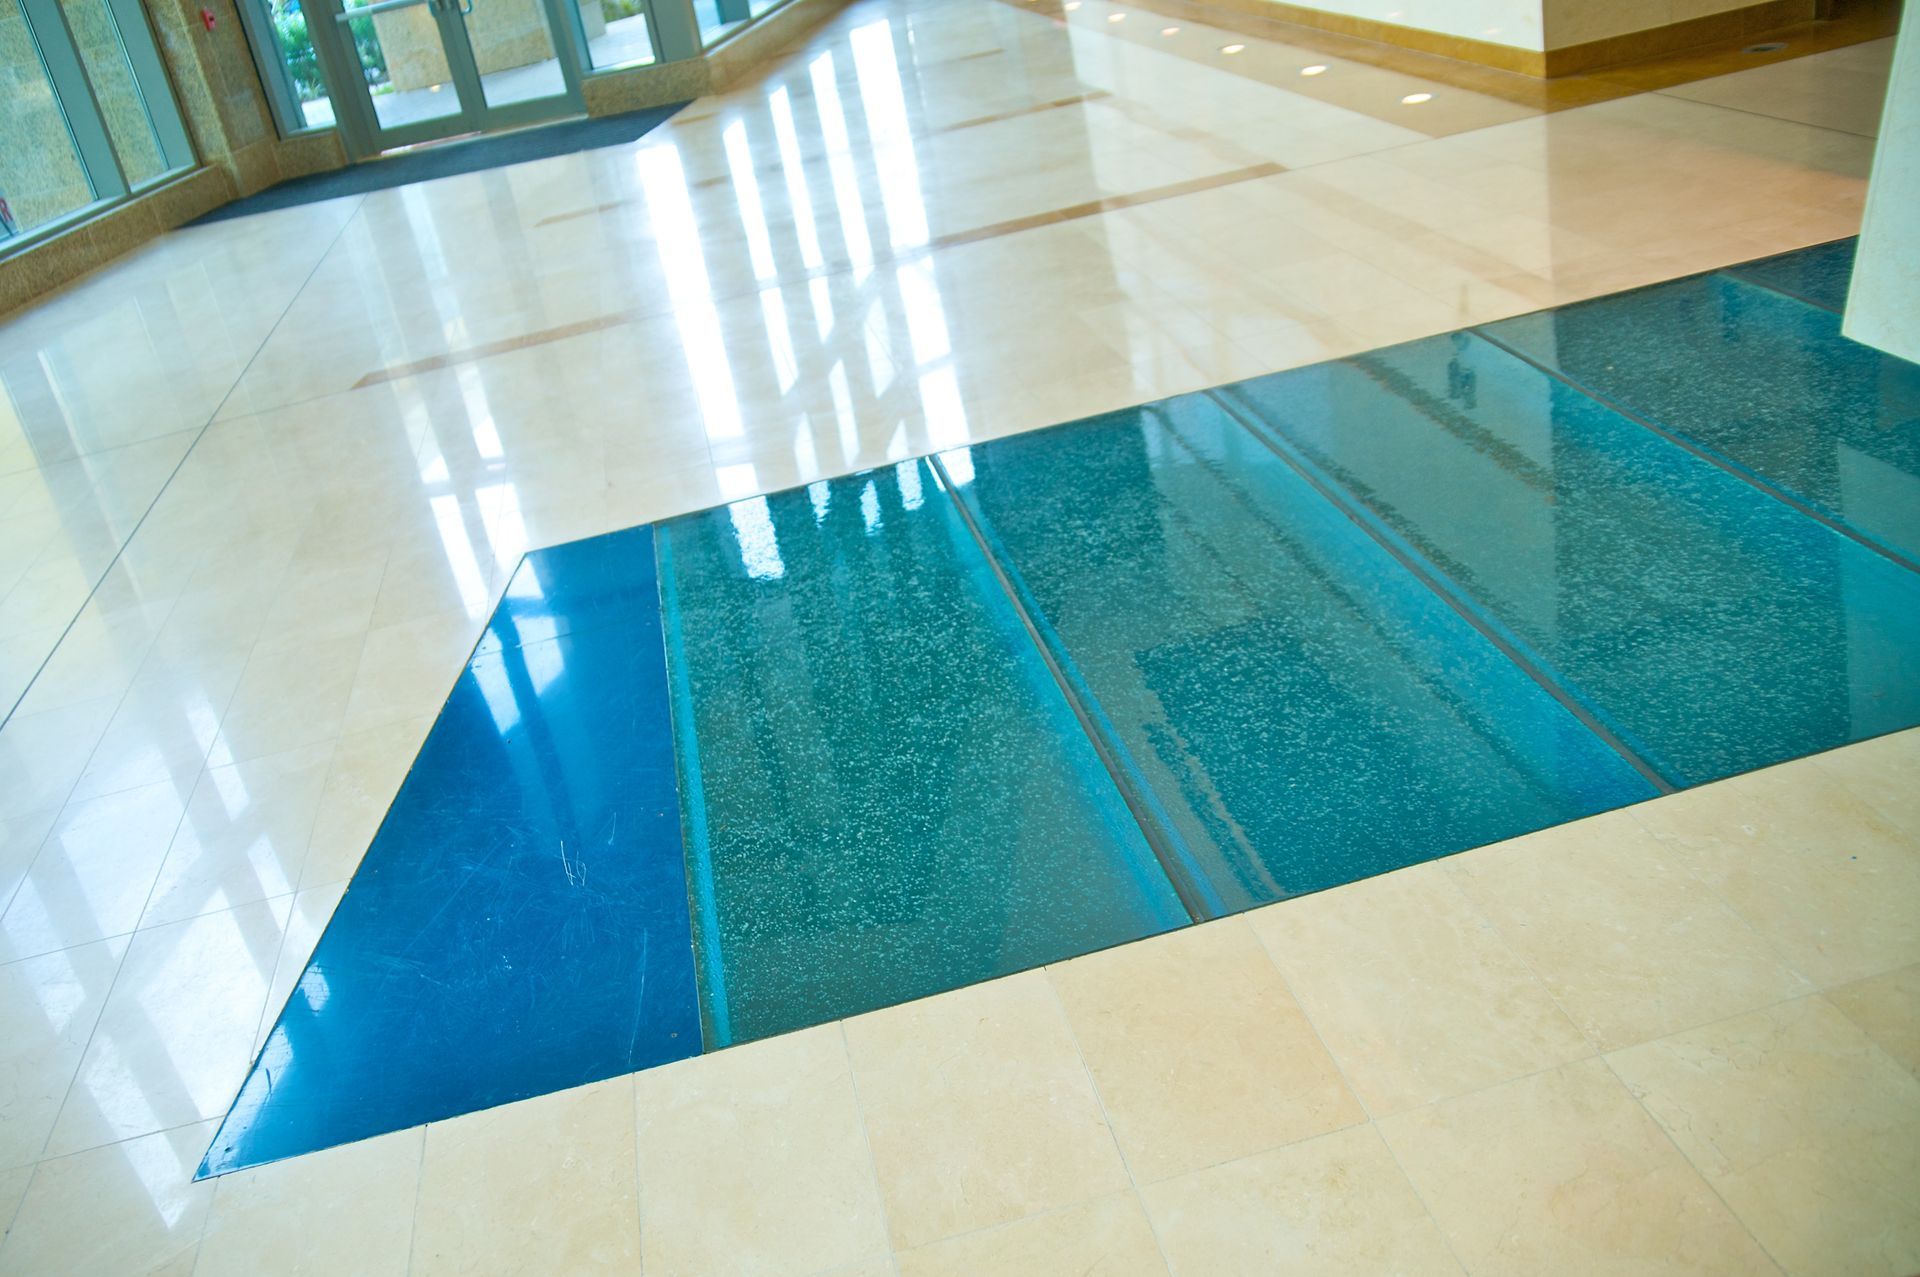 Blue and green glass flooring incorporated into a tile floor.